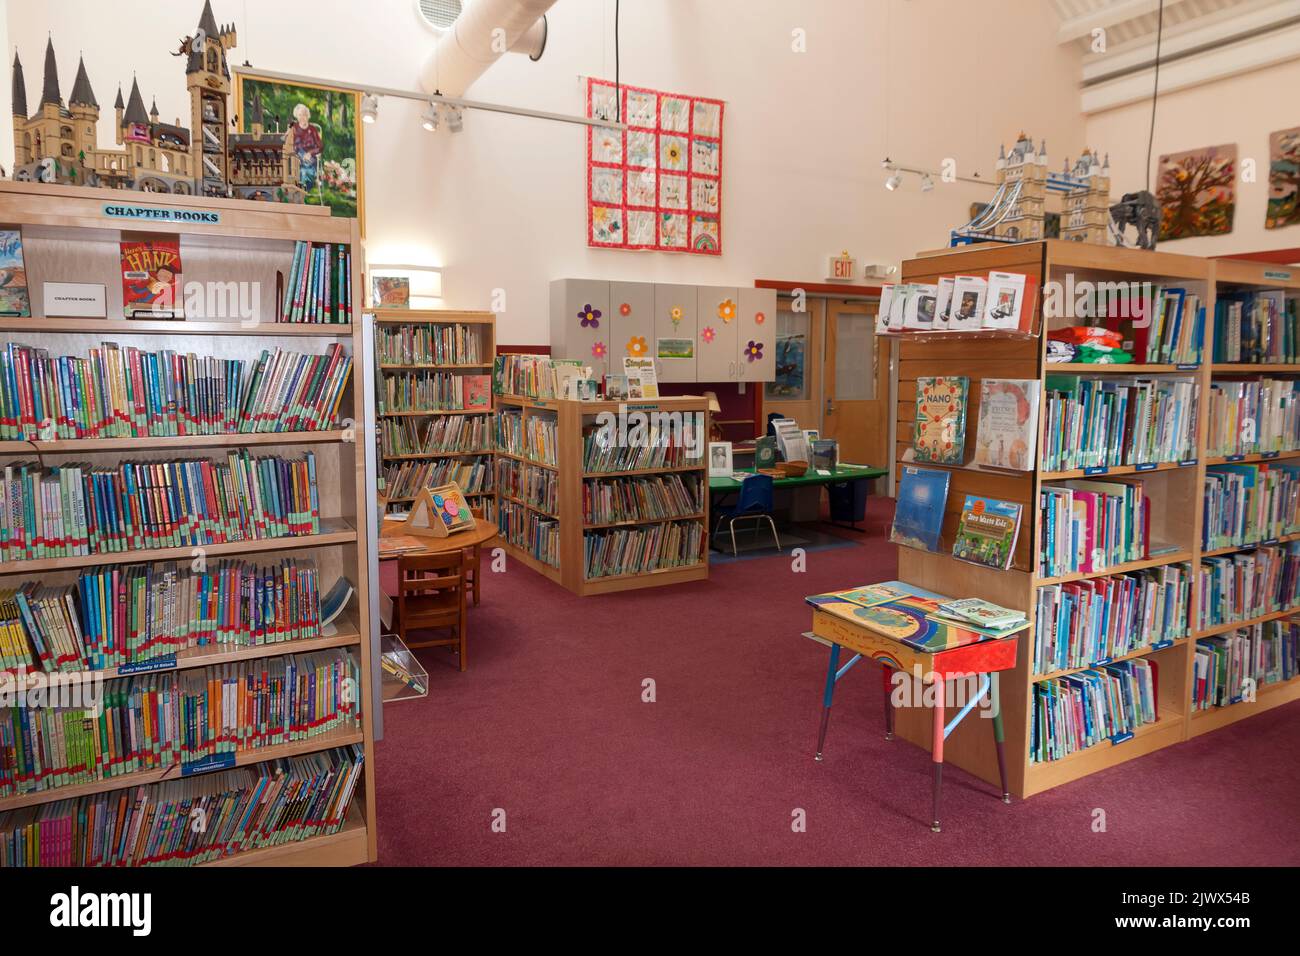 Colorful and stimulating children's section in a public library. Stock Photo